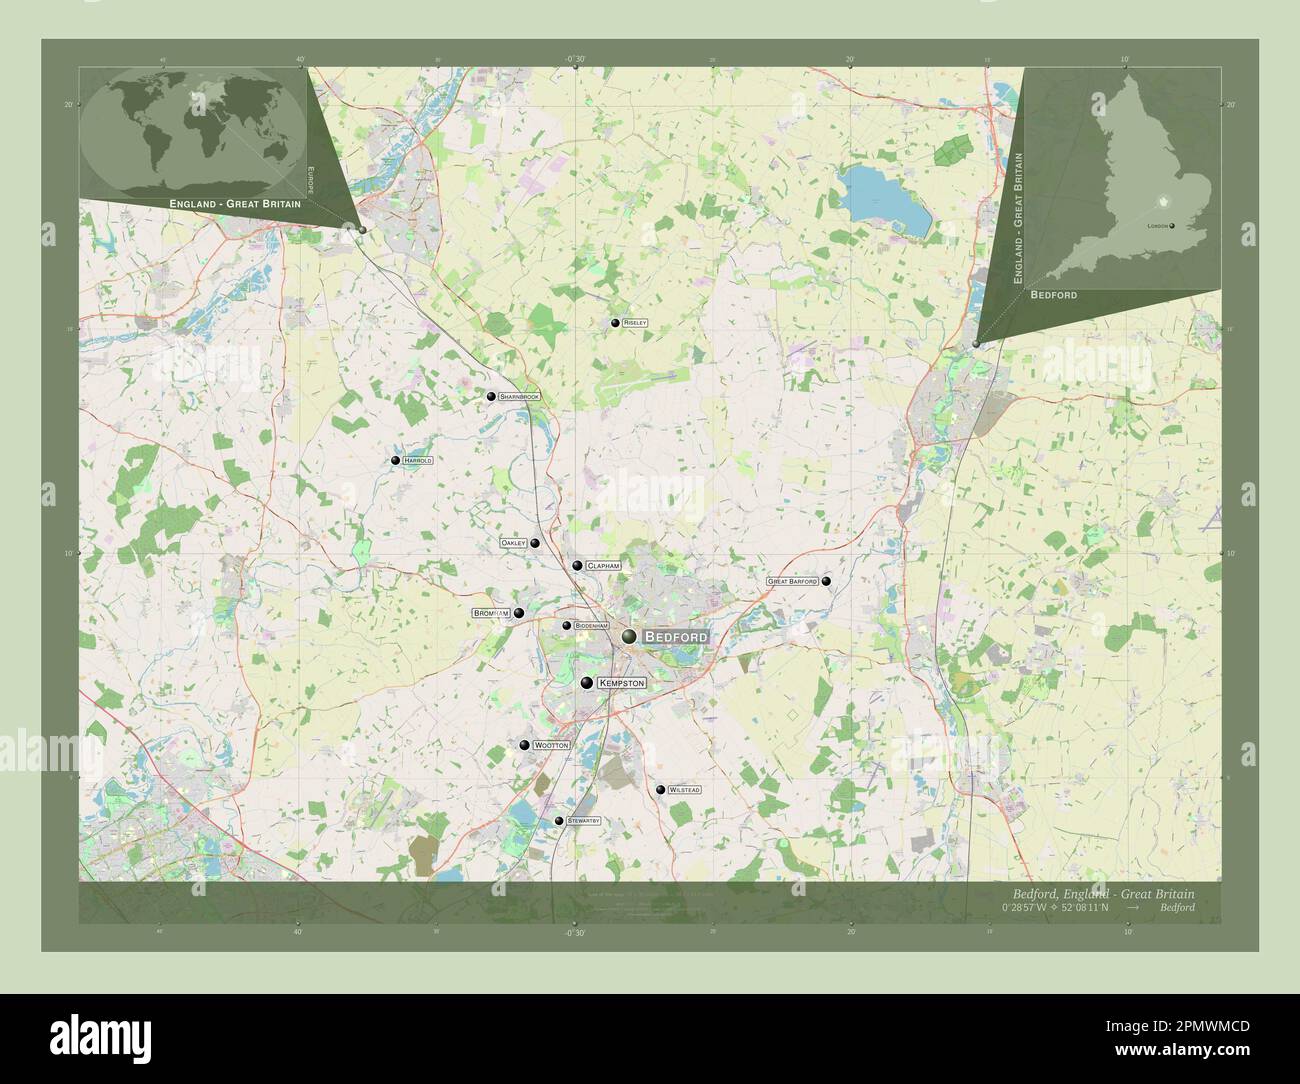 Bedford, administrative county of England - Great Britain. Open Street Map. Locations and names of major cities of the region. Corner auxiliary locati Stock Photo